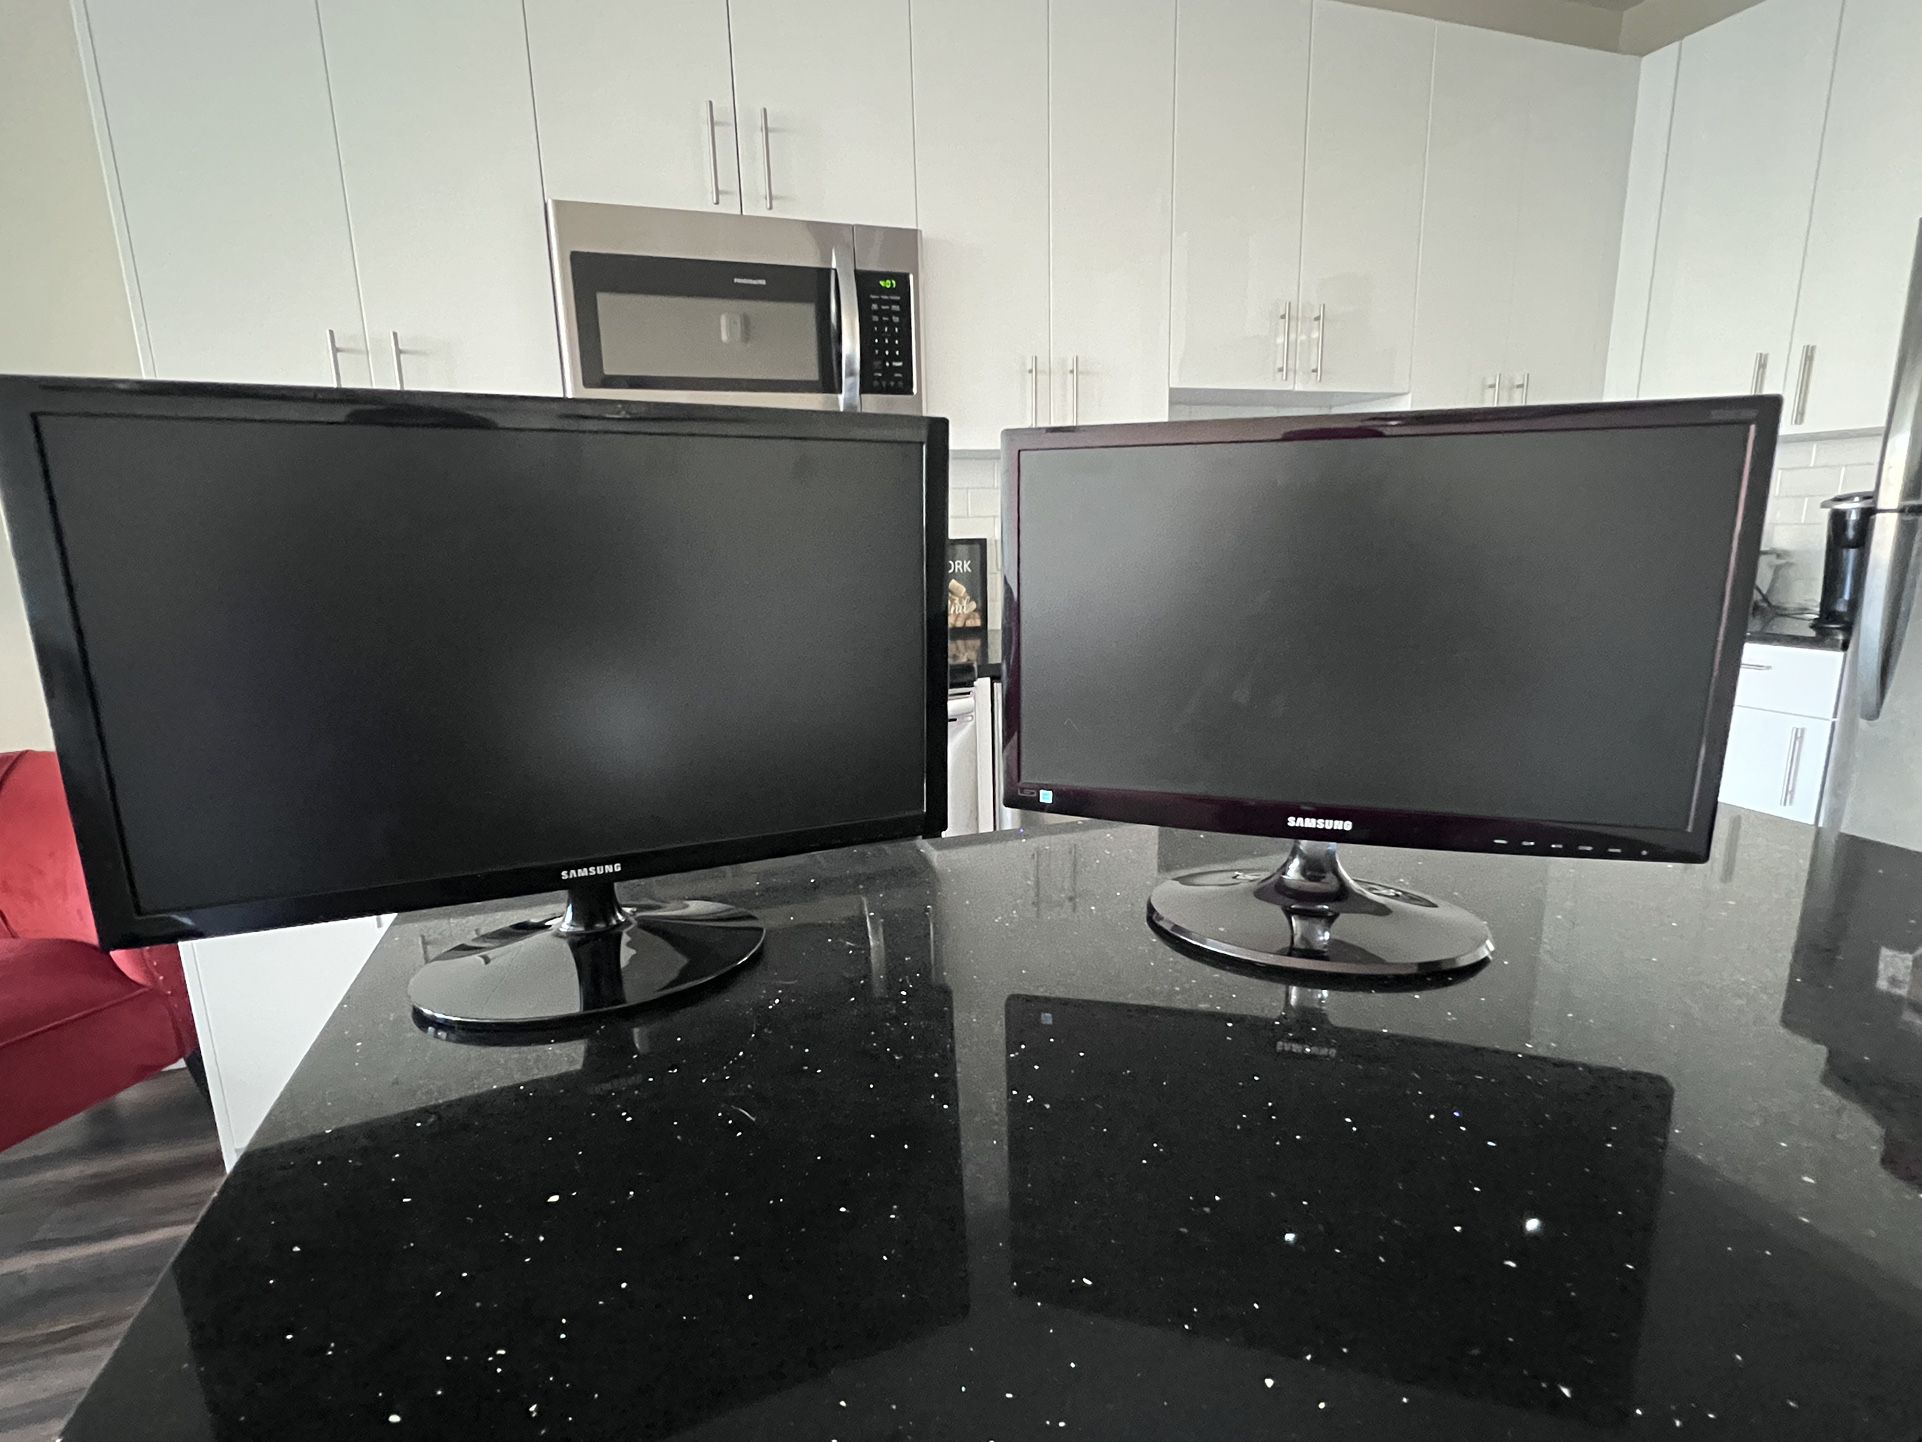 Samsung Monitors (chords Included)